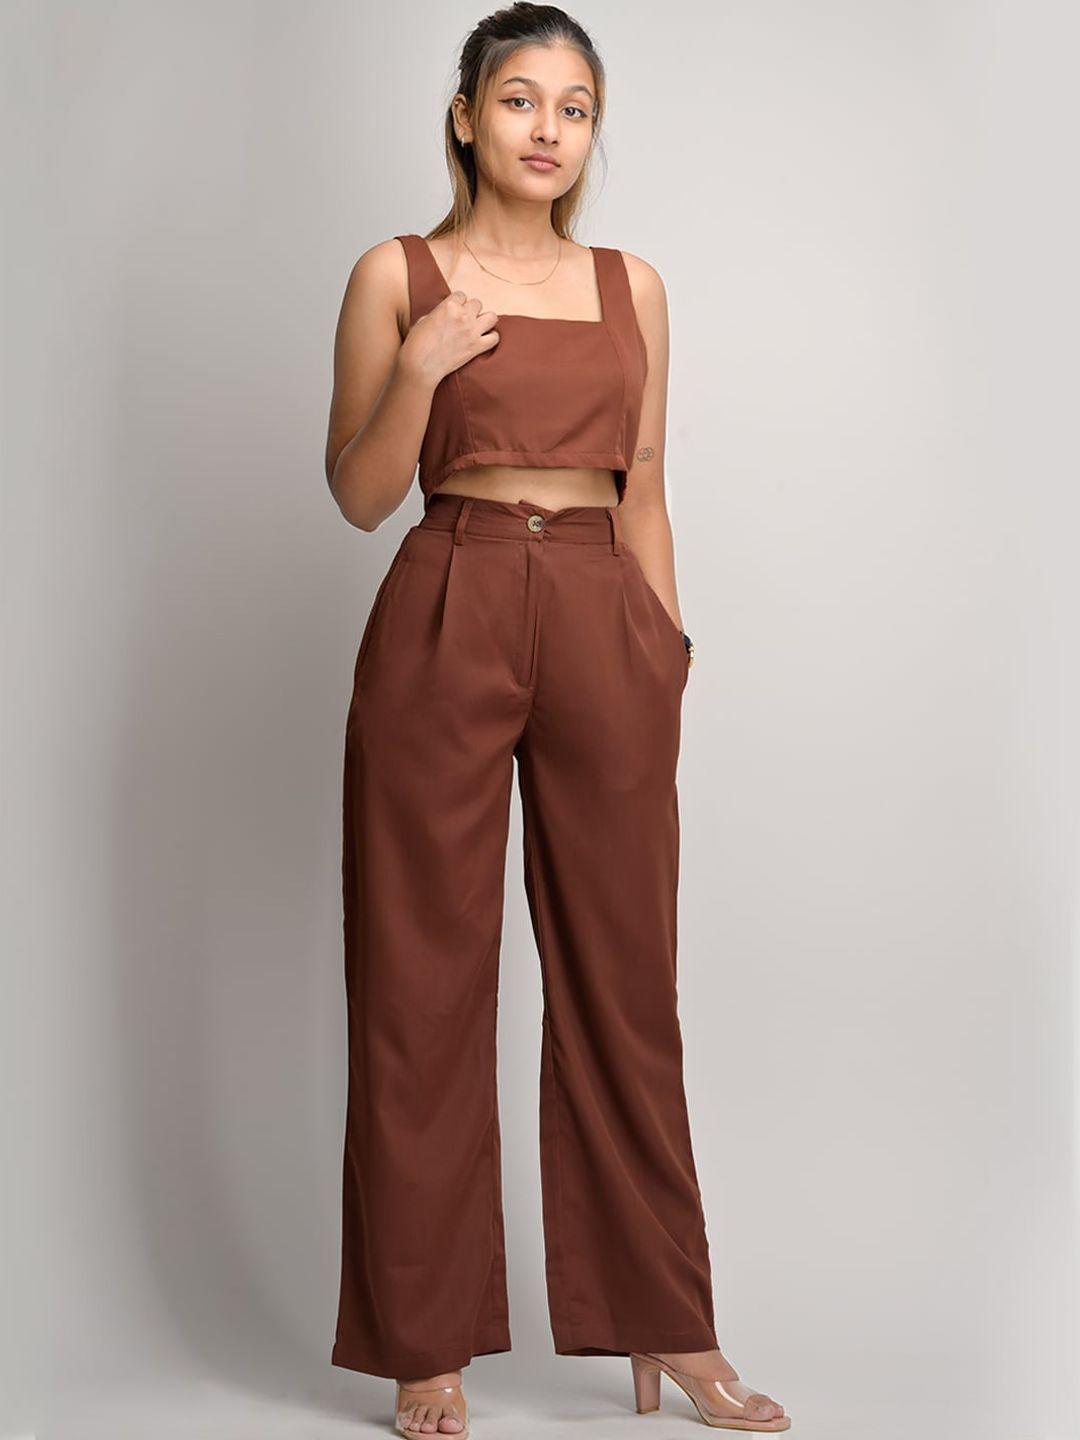 street style store square neck crop top with trousers